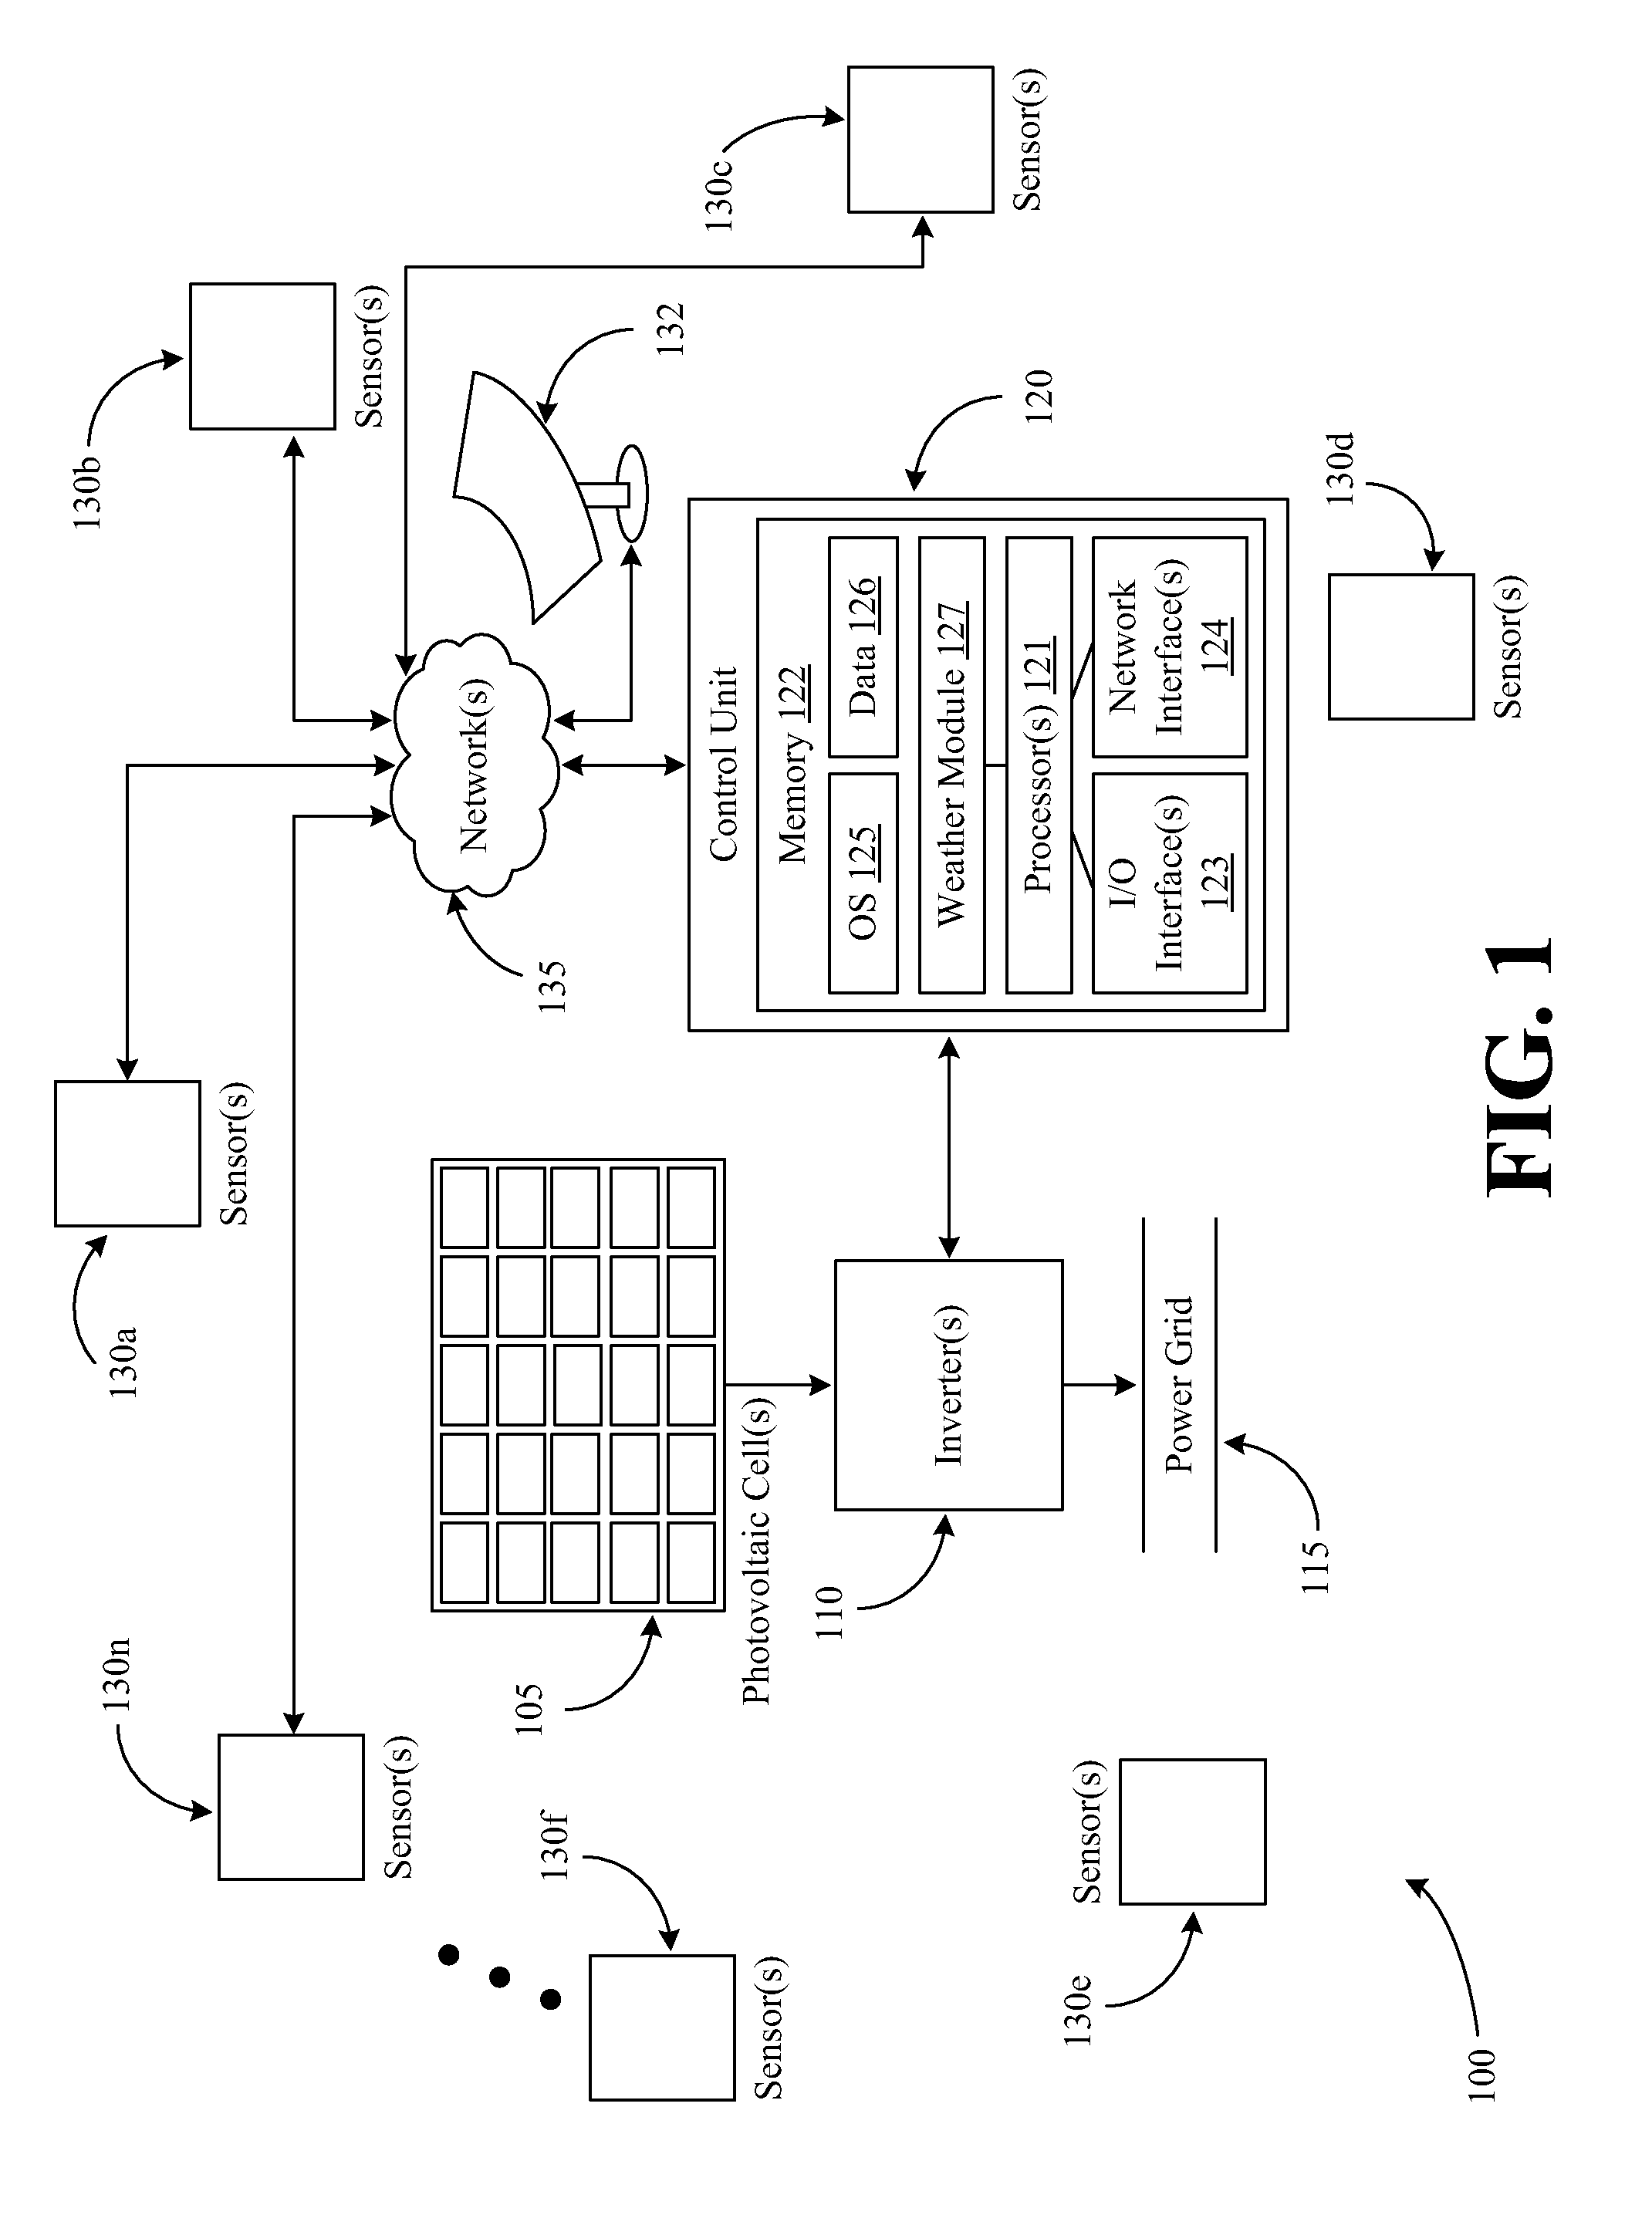 Systems and methods for interfacing renewable power sources to a power grid